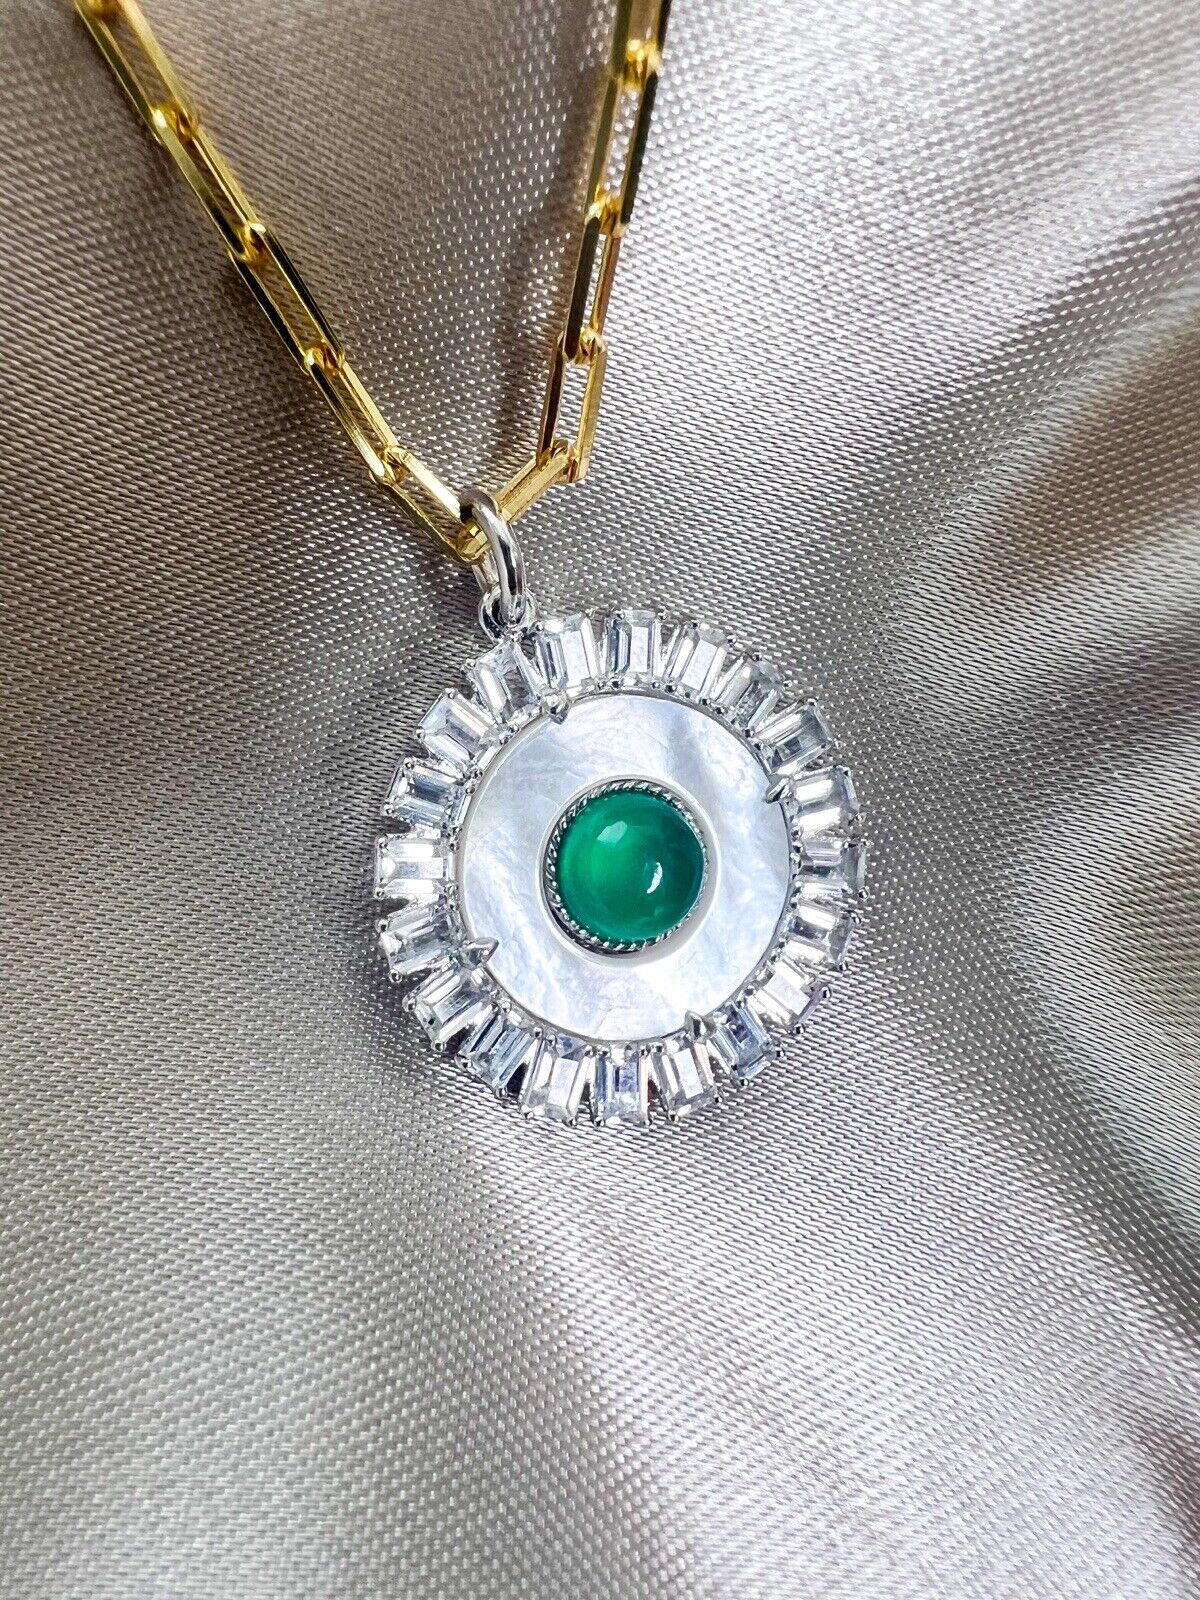 【Green Onyx Rhodium Plated】Lucky Charm Pendant Necklace Evil Eye Sterling Silver925 Mother of Pearl Beautiful